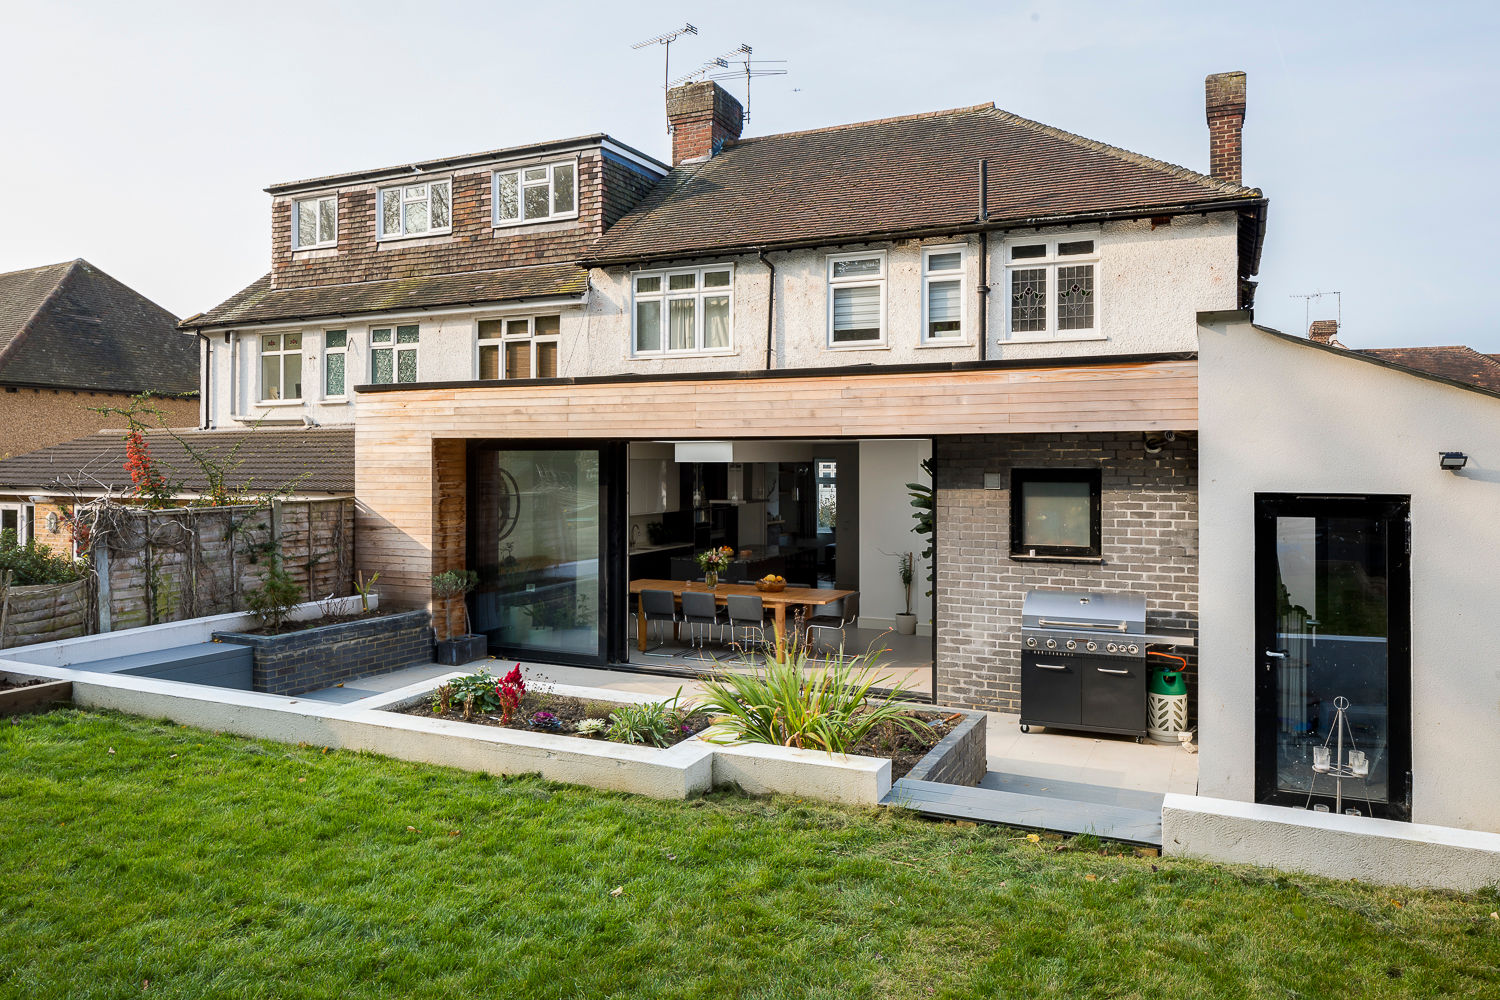 Large Rear Extension, Semi-detached House, Woodford Green, North-East London, Model Projects Ltd Model Projects Ltd Modern houses model projects,timber cladding,planters,slidding doors